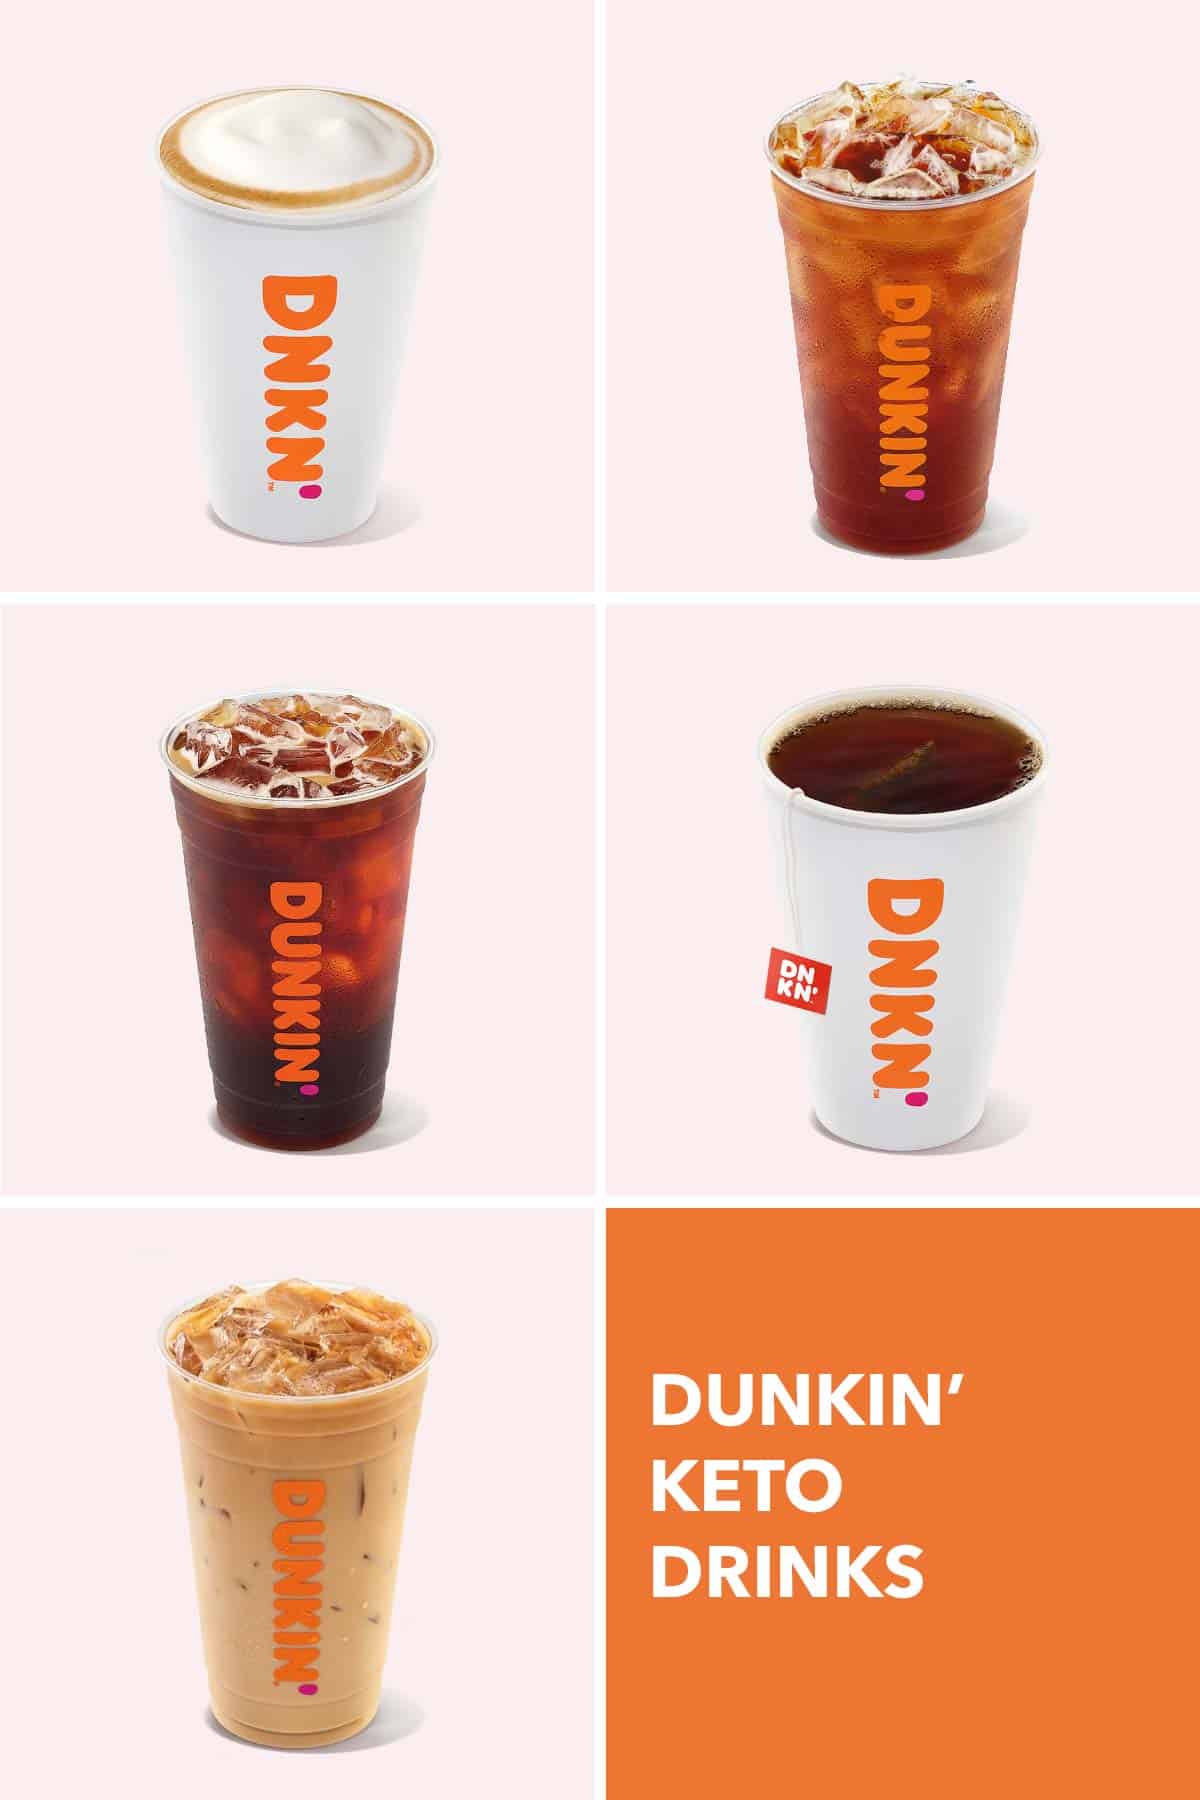 Dunkin' Donuts Low Carb Drink